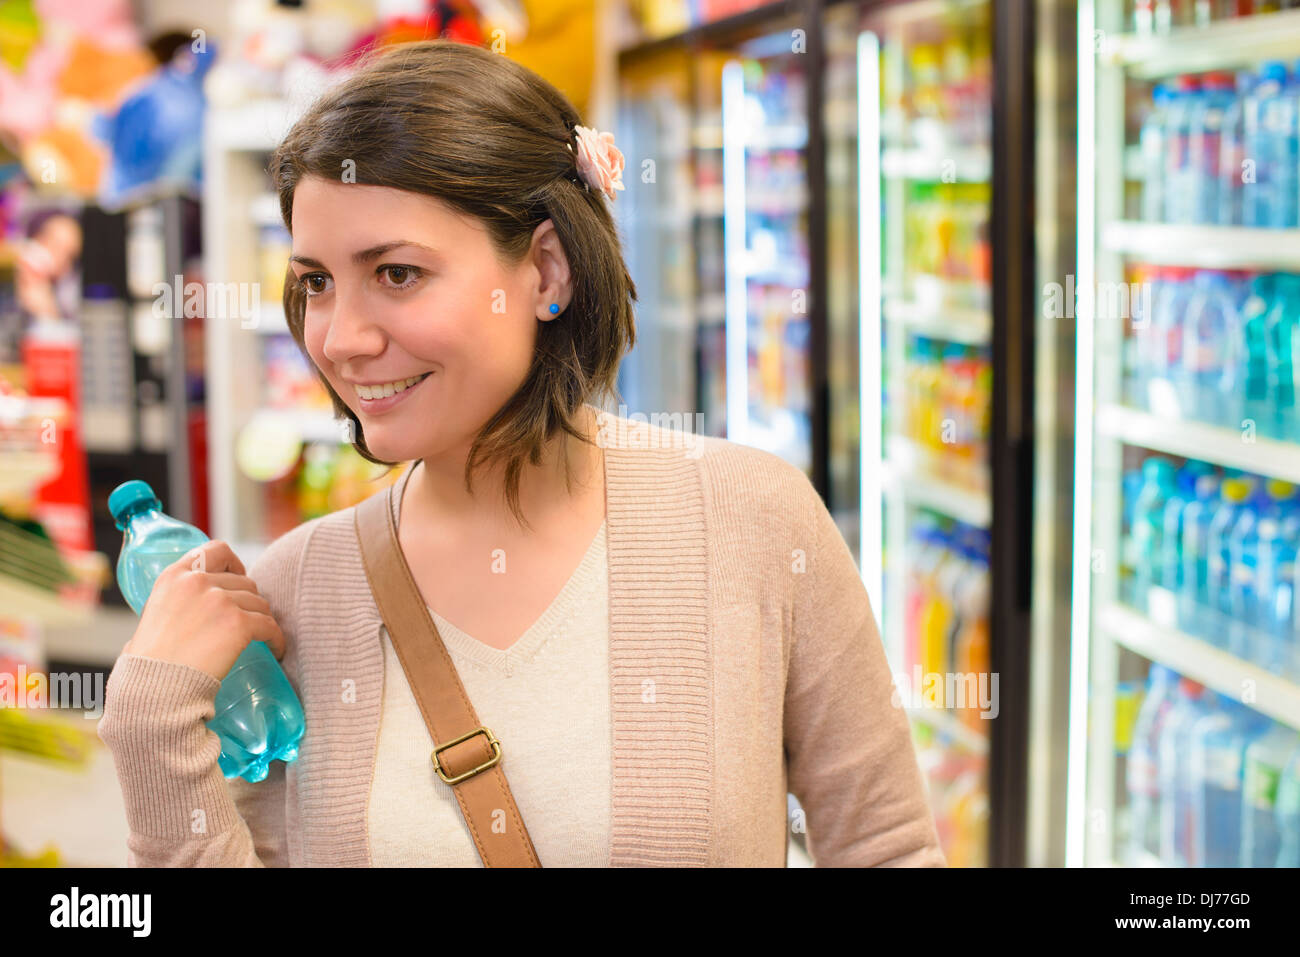 Young woman buying a bottle of water from a store Stock Photo